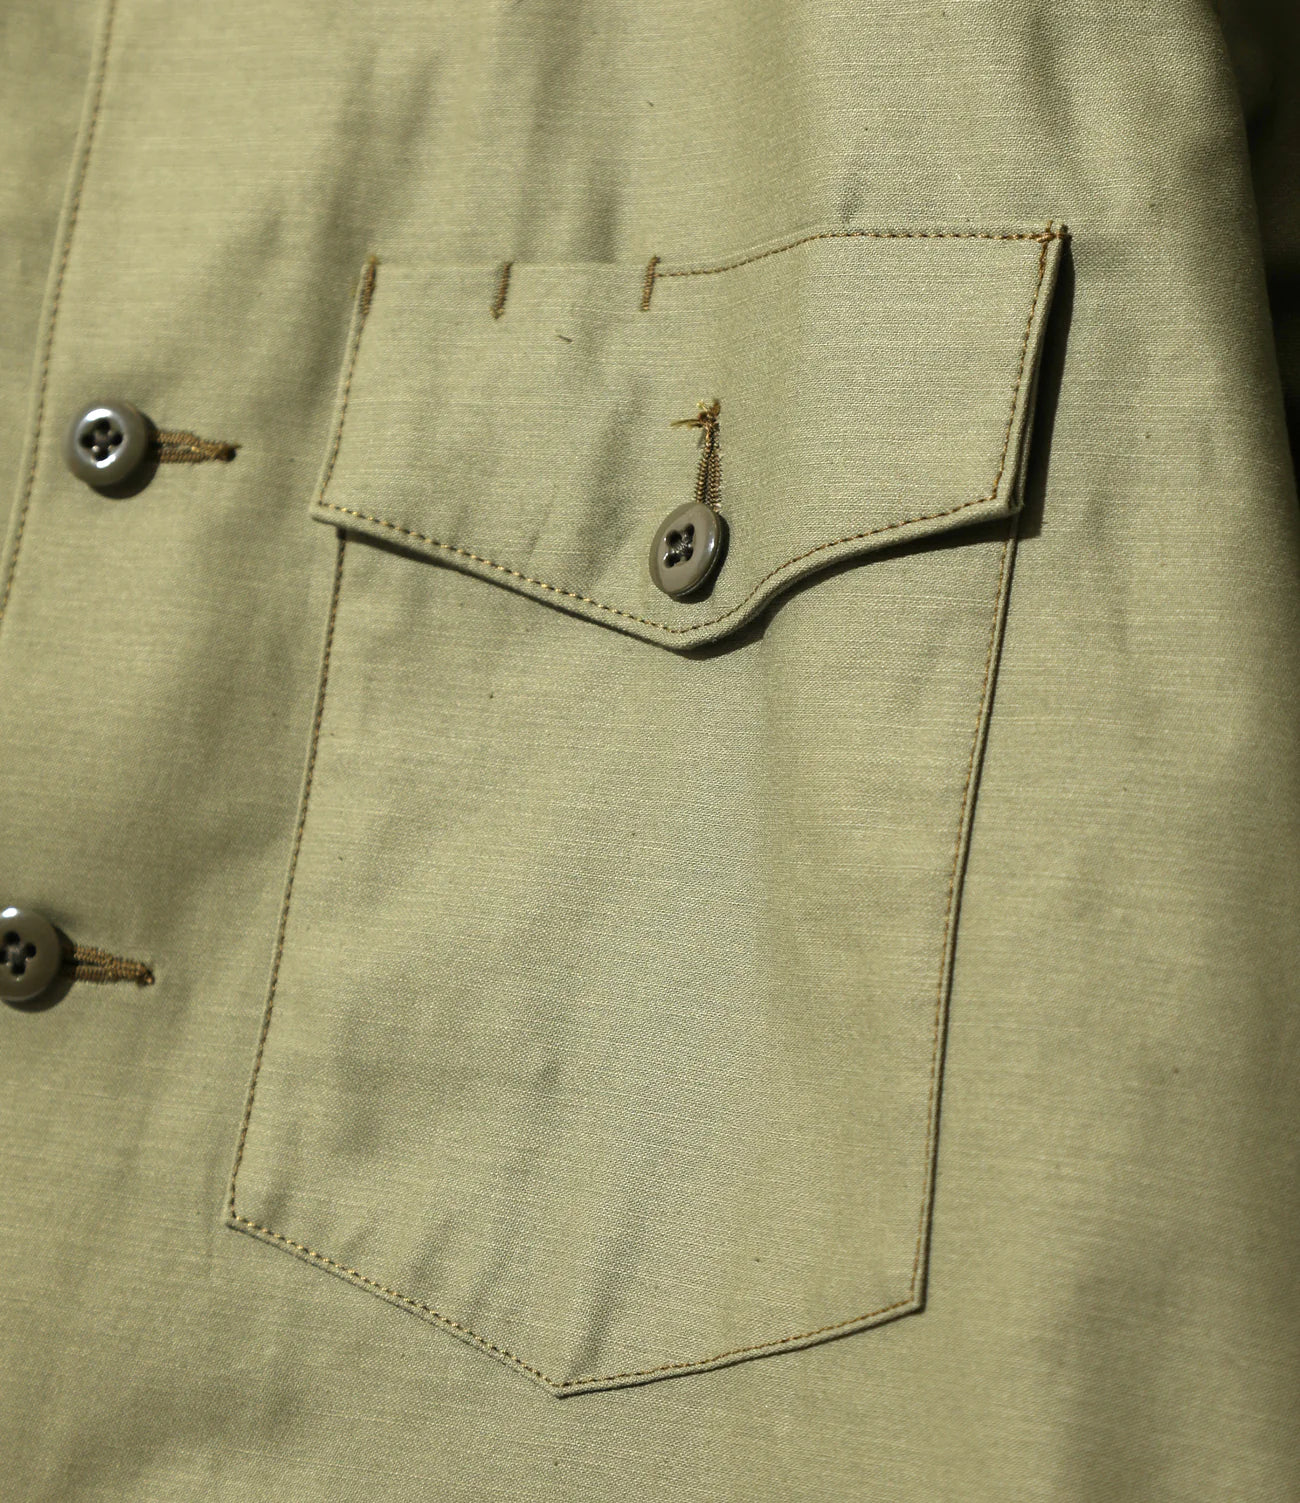 Needles S/S Fatigue Shirt - Back Sateen - Olive